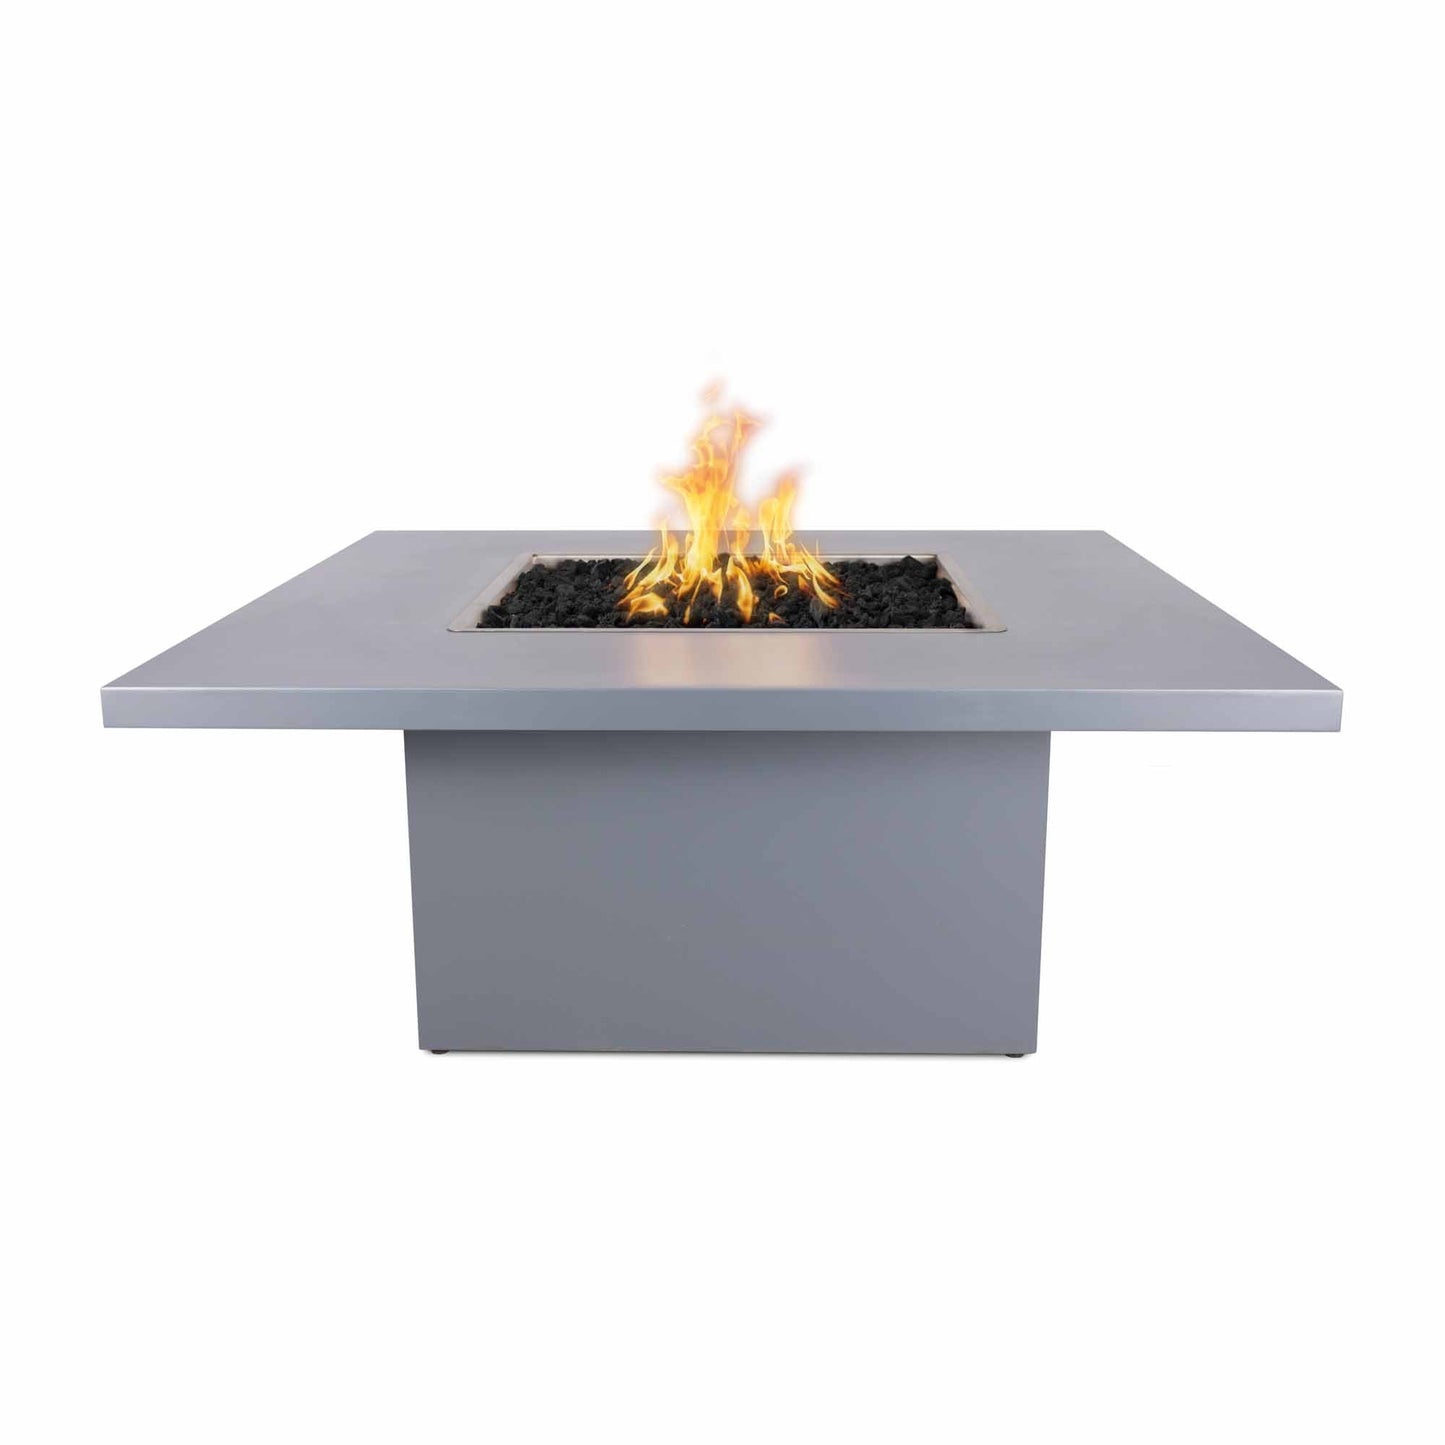 The Outdoor Plus Square Bella 60" Hammered Copper Liquid Propane Fire Pit with Match Lit Ignition